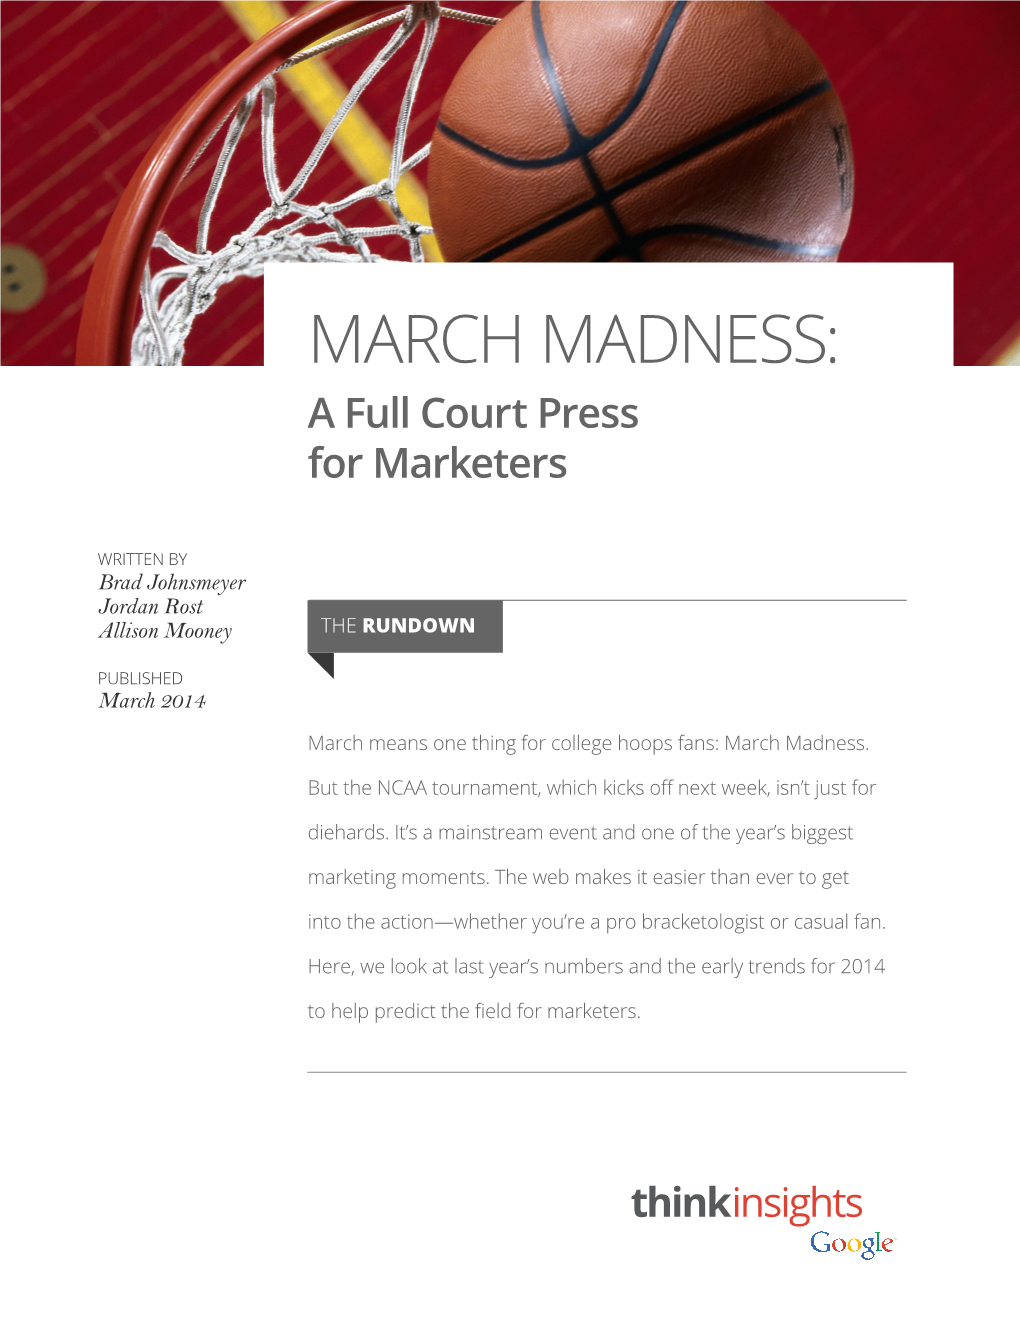 MARCH MADNESS: a Full Court Press for Marketers